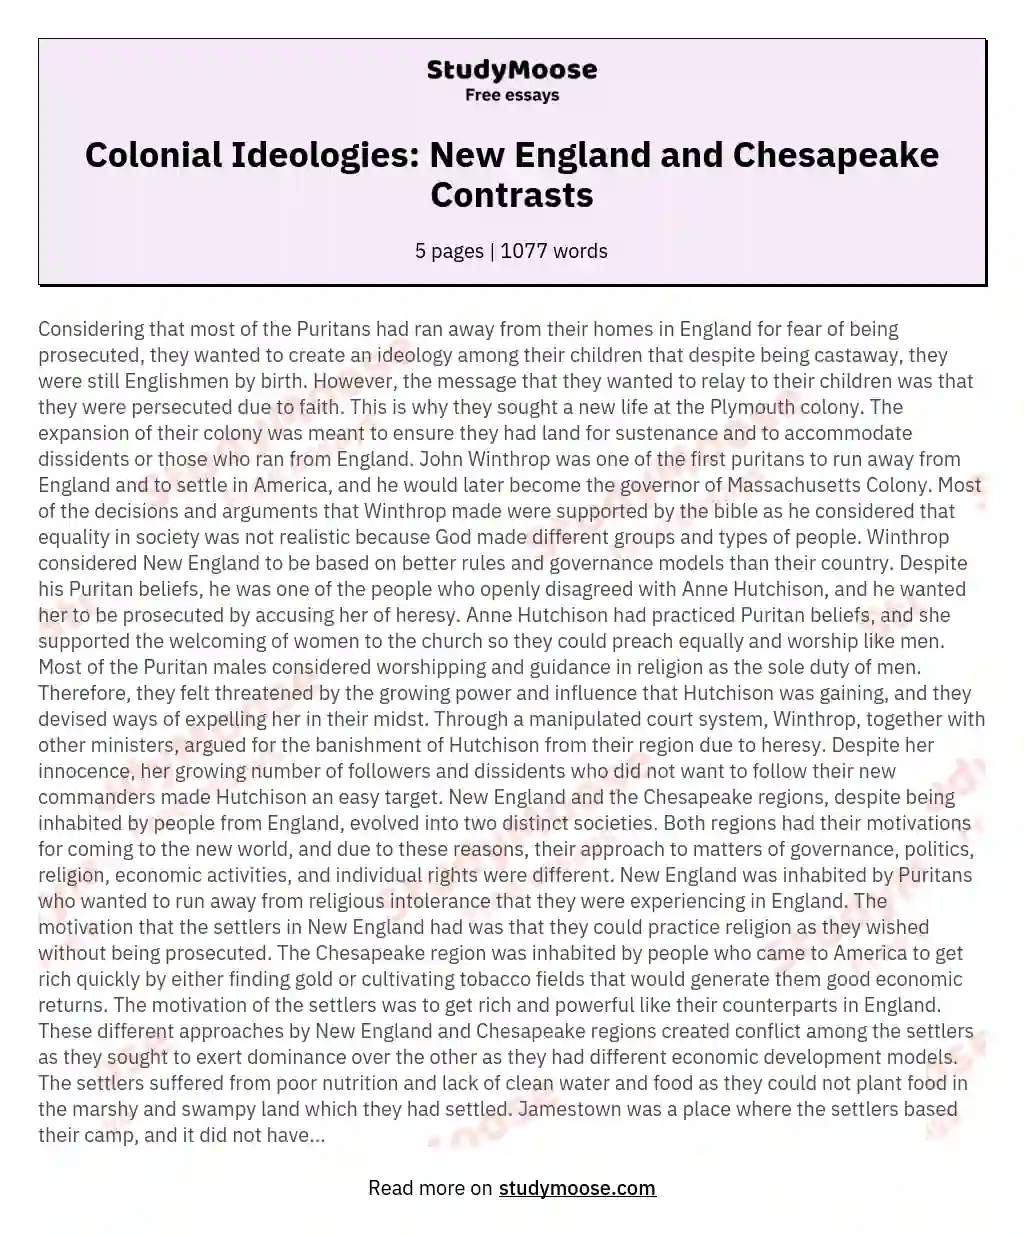 Colonial Ideologies: New England and Chesapeake Contrasts essay